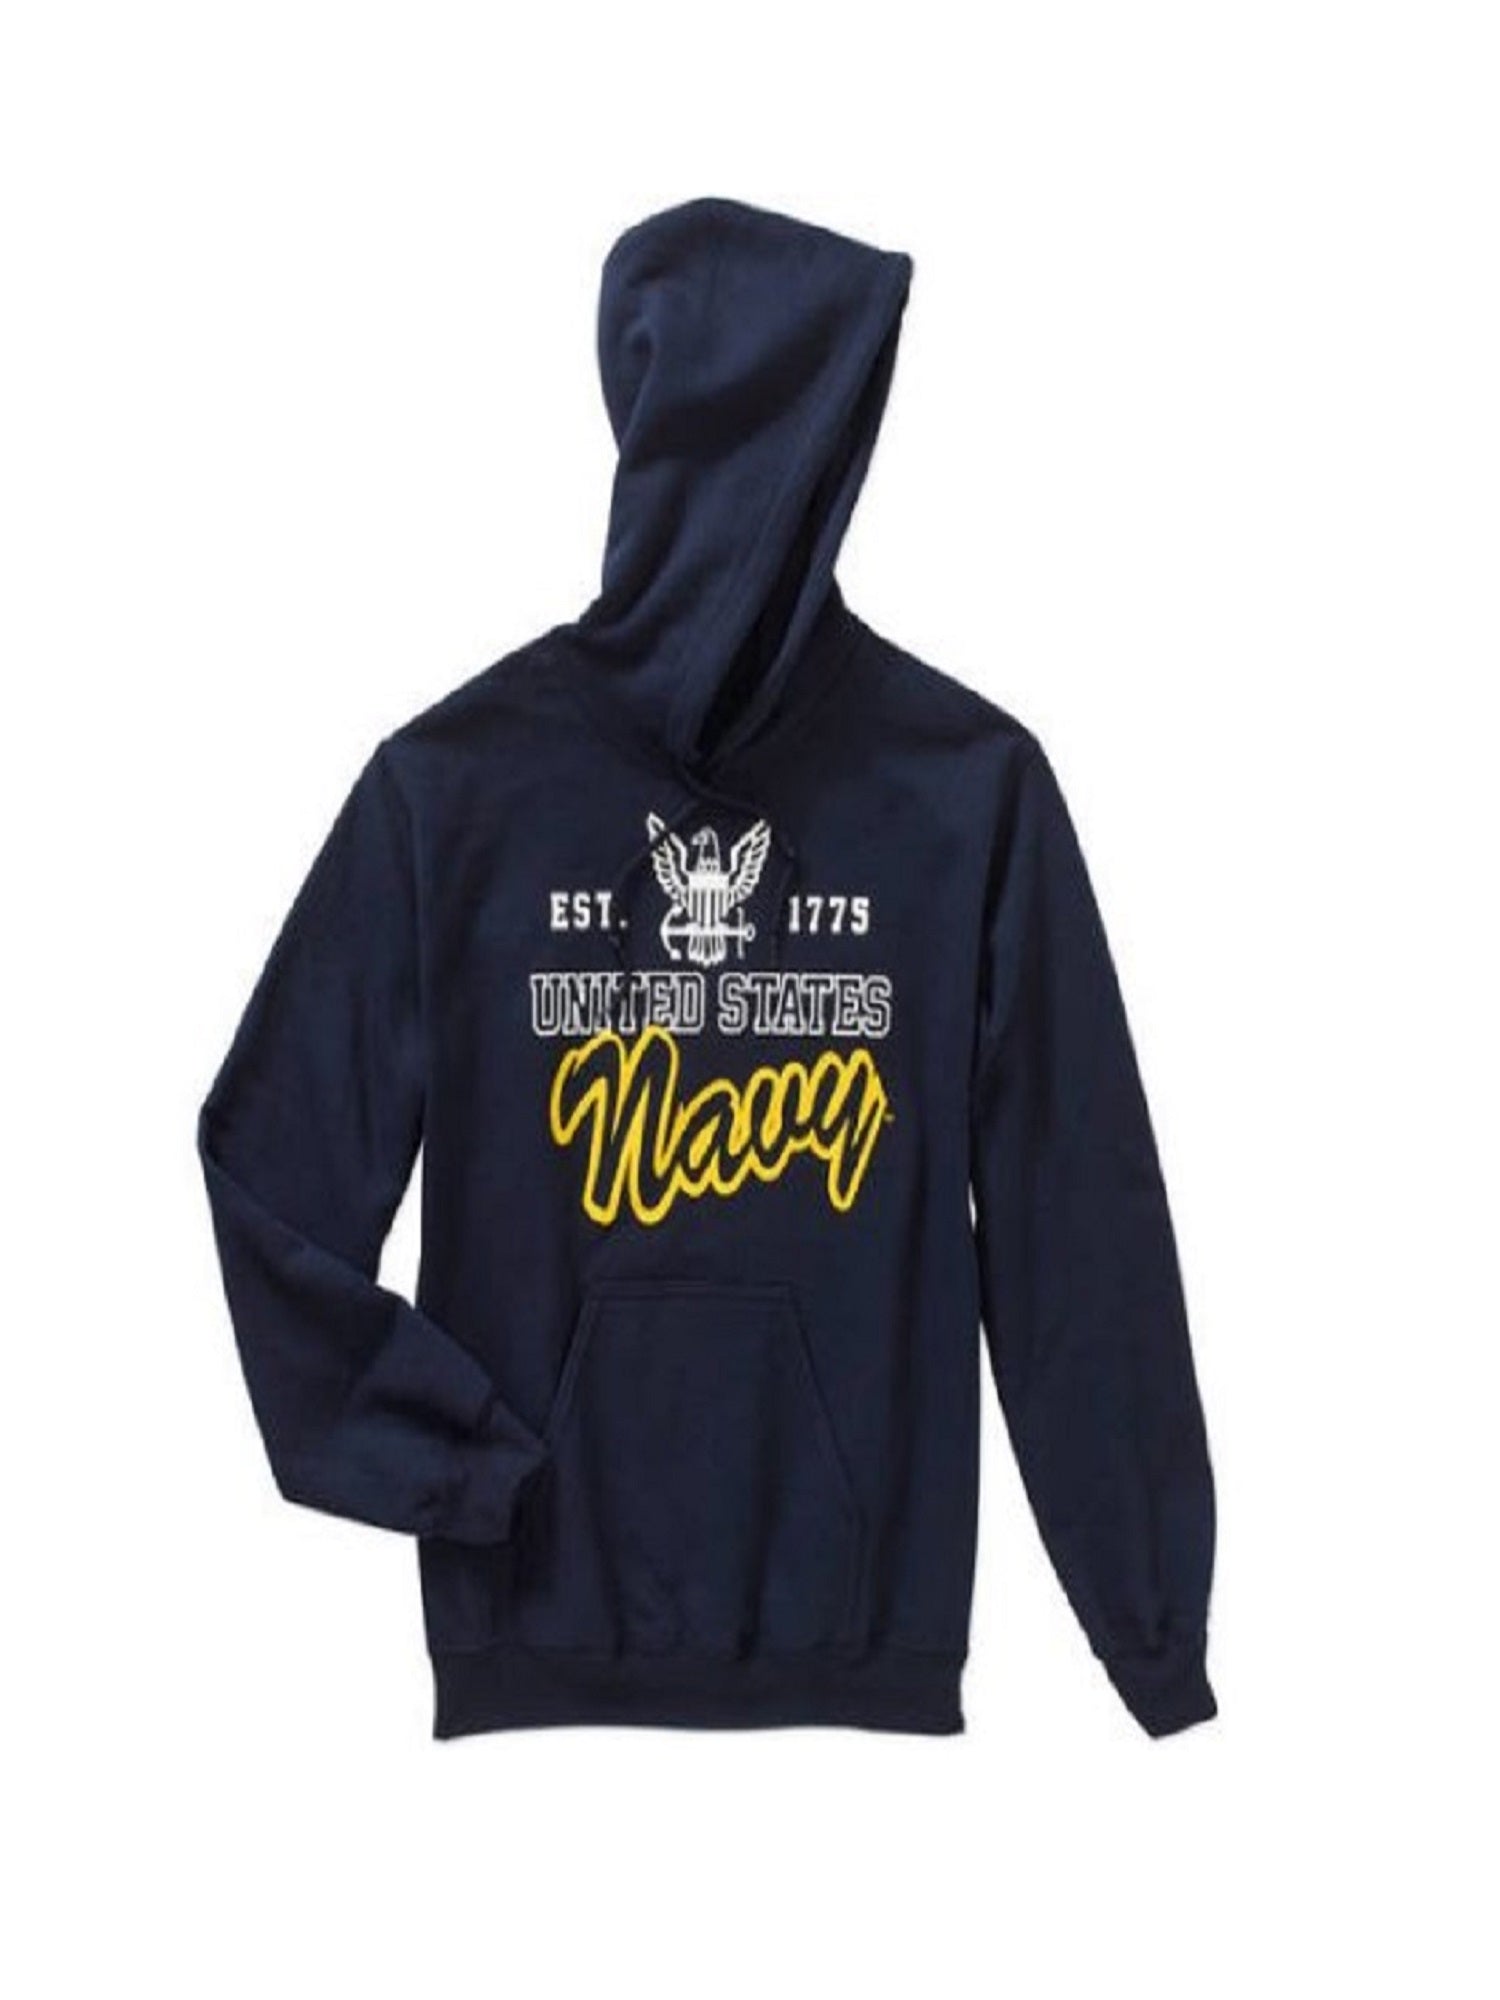 Military Officially Licensed Navy Fleece Traditional Hoodie, X-Large